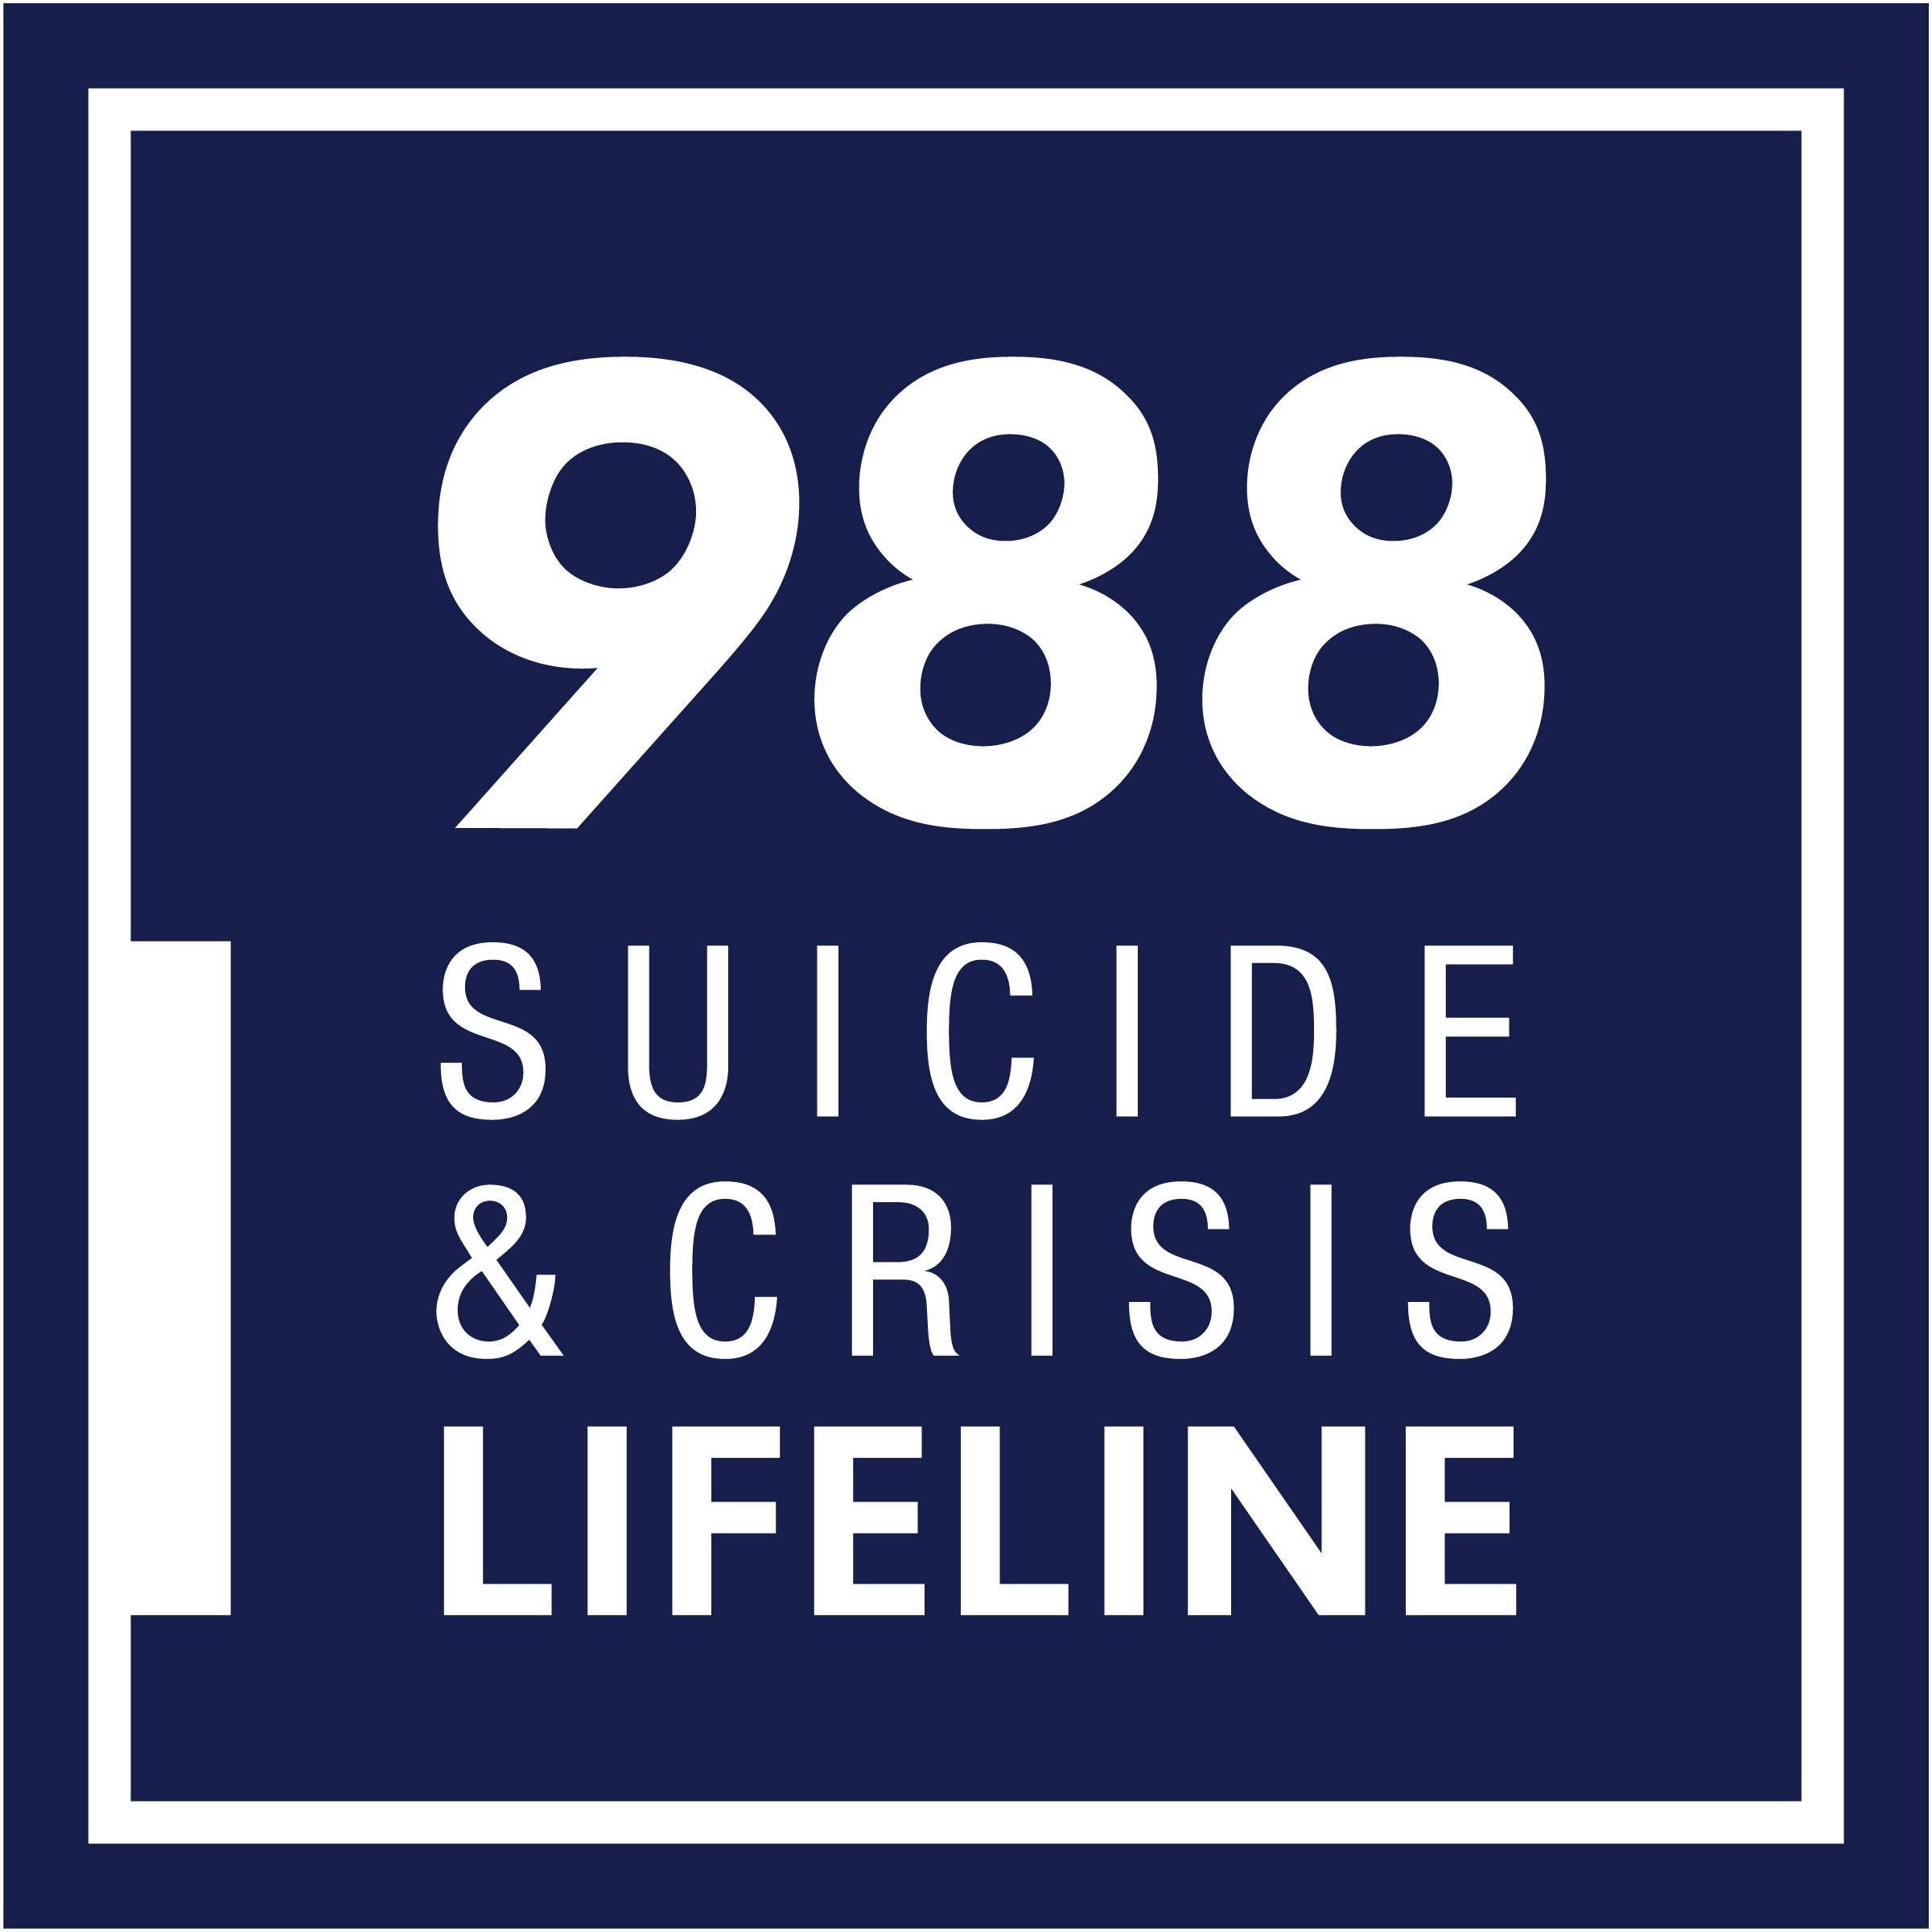 Click here to visit http://suicidepreventionlifeline.org